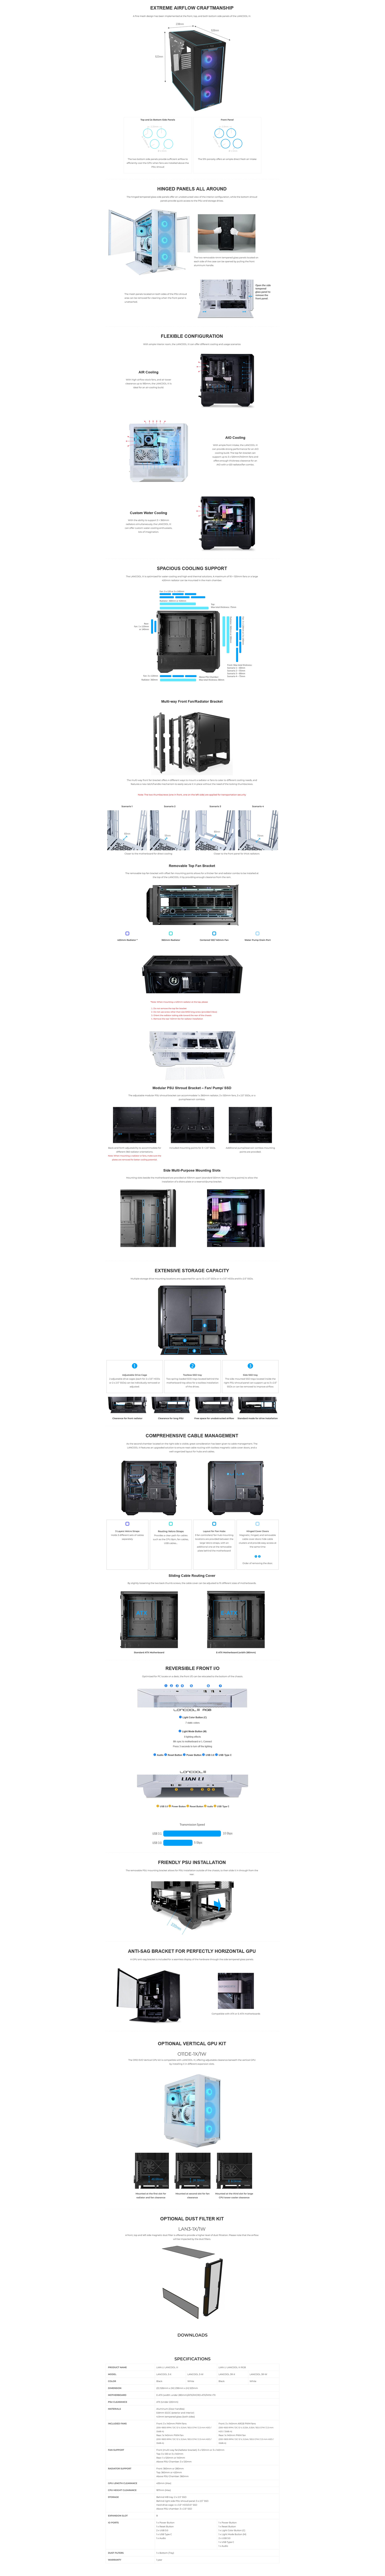 A large marketing image providing additional information about the product Lian Li Lancool III RGB Mid Tower Case - White - Additional alt info not provided